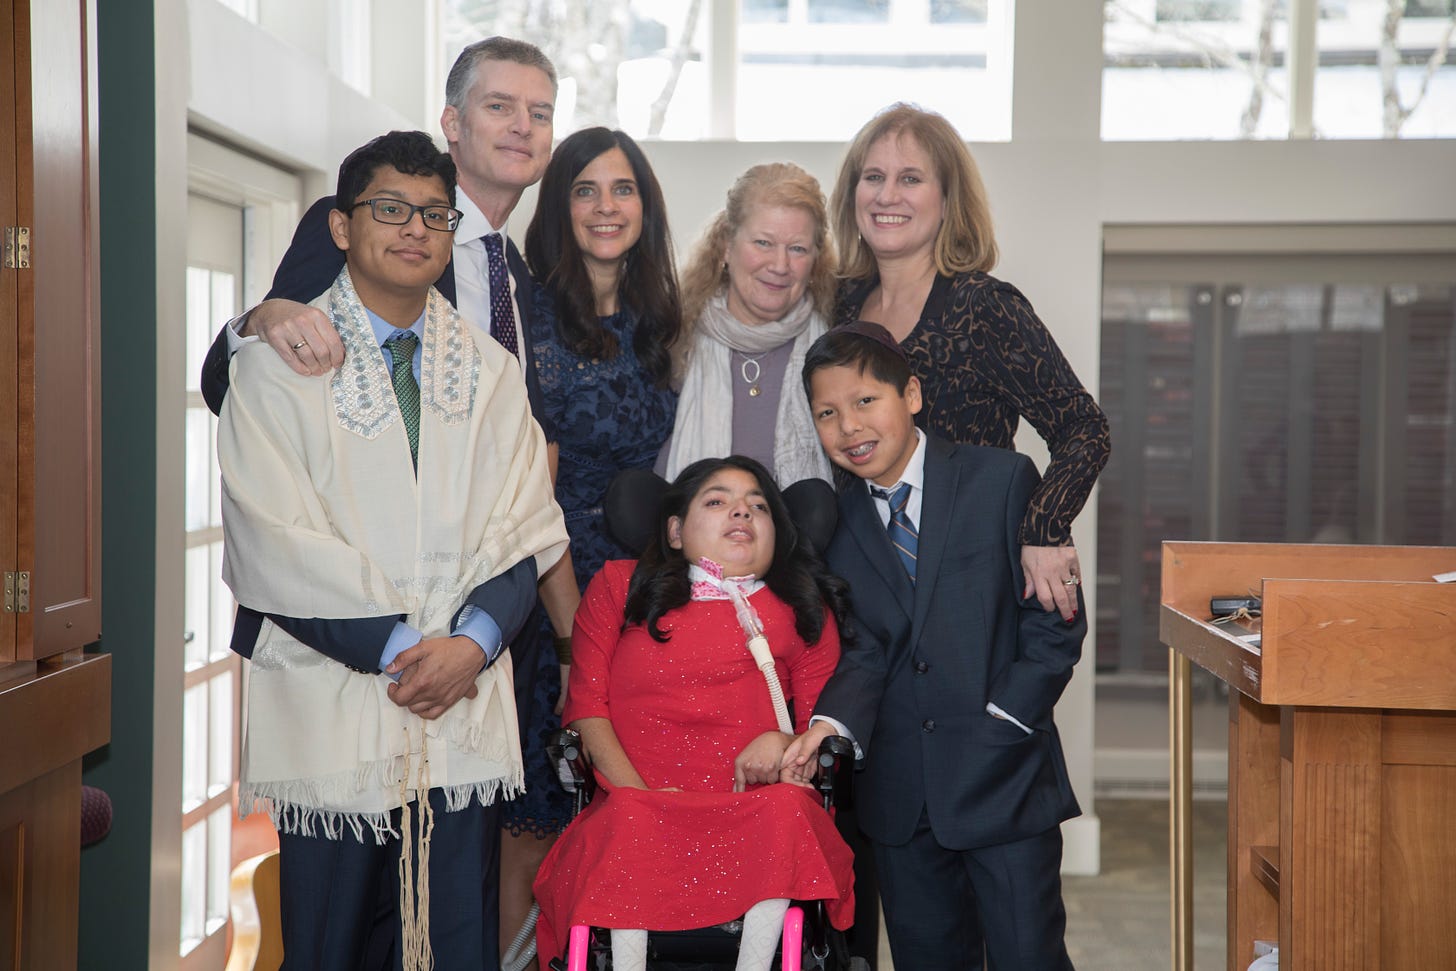 Dalia wears a red dress and sits in a wheelchair surrounded by parents, siblings and Grandma